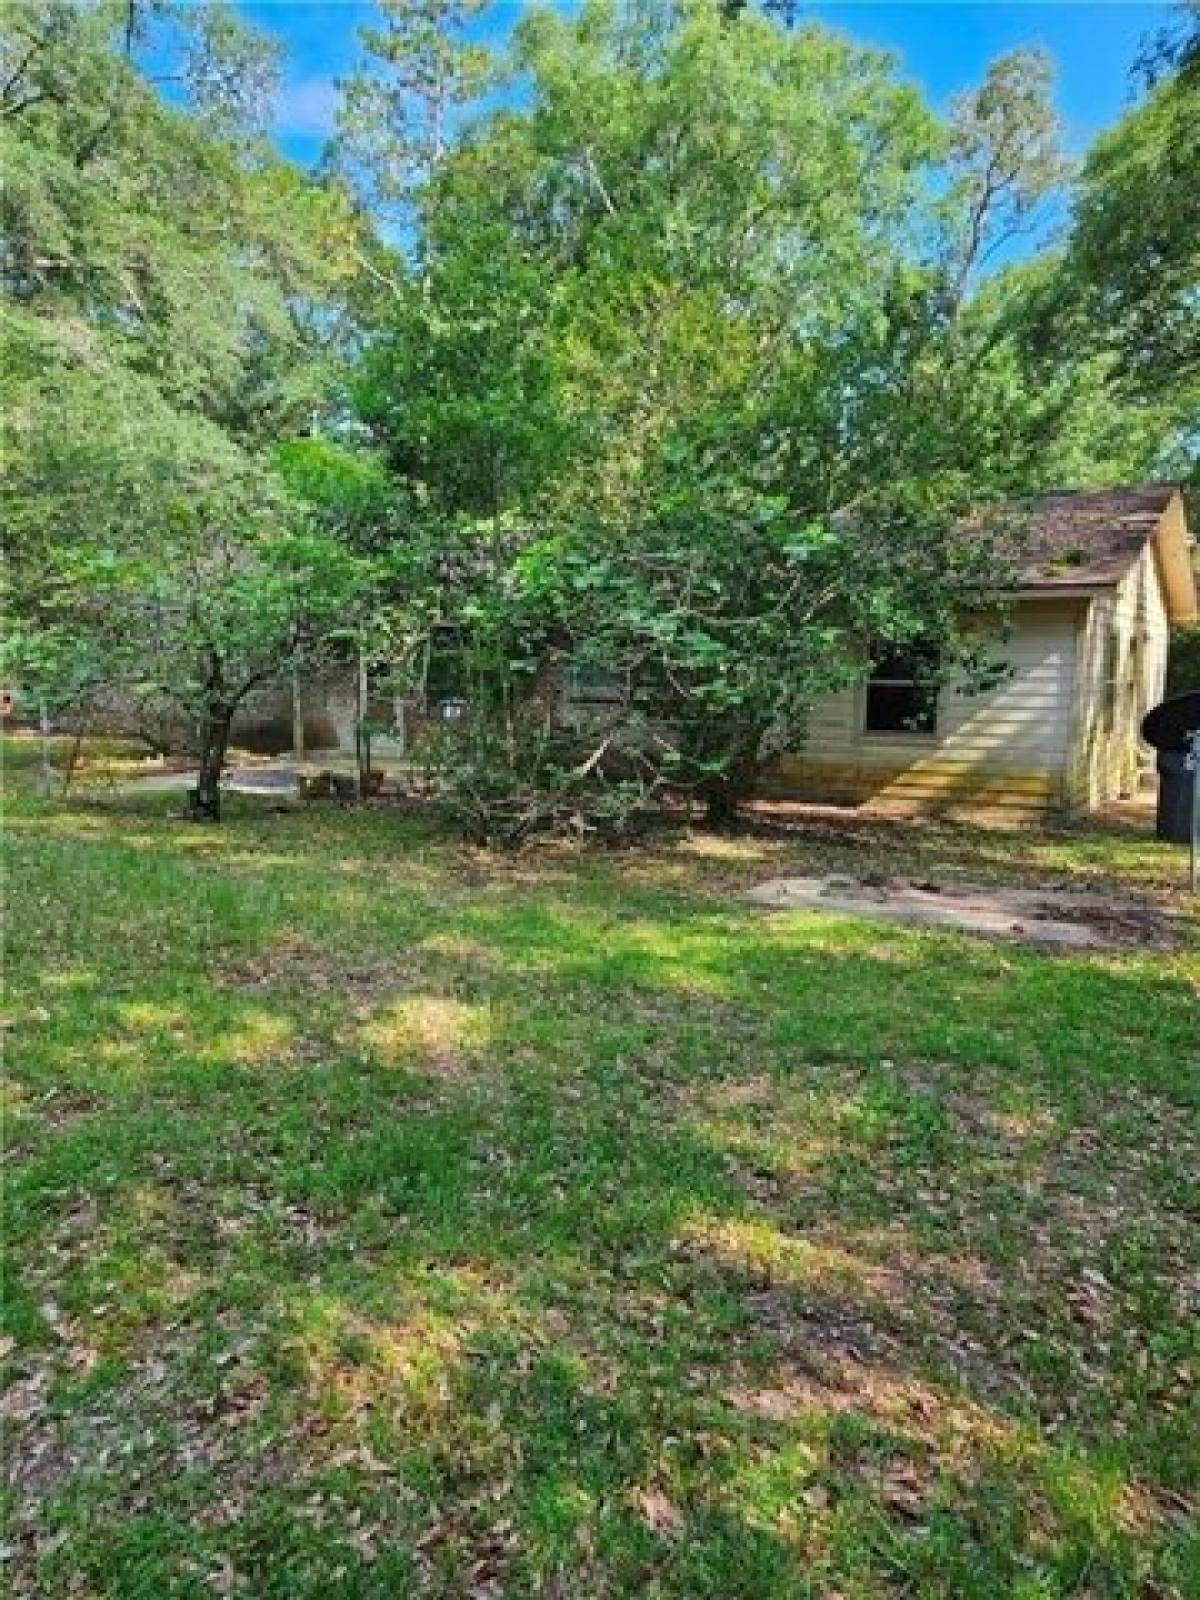 Picture of Home For Sale in Theodore, Alabama, United States